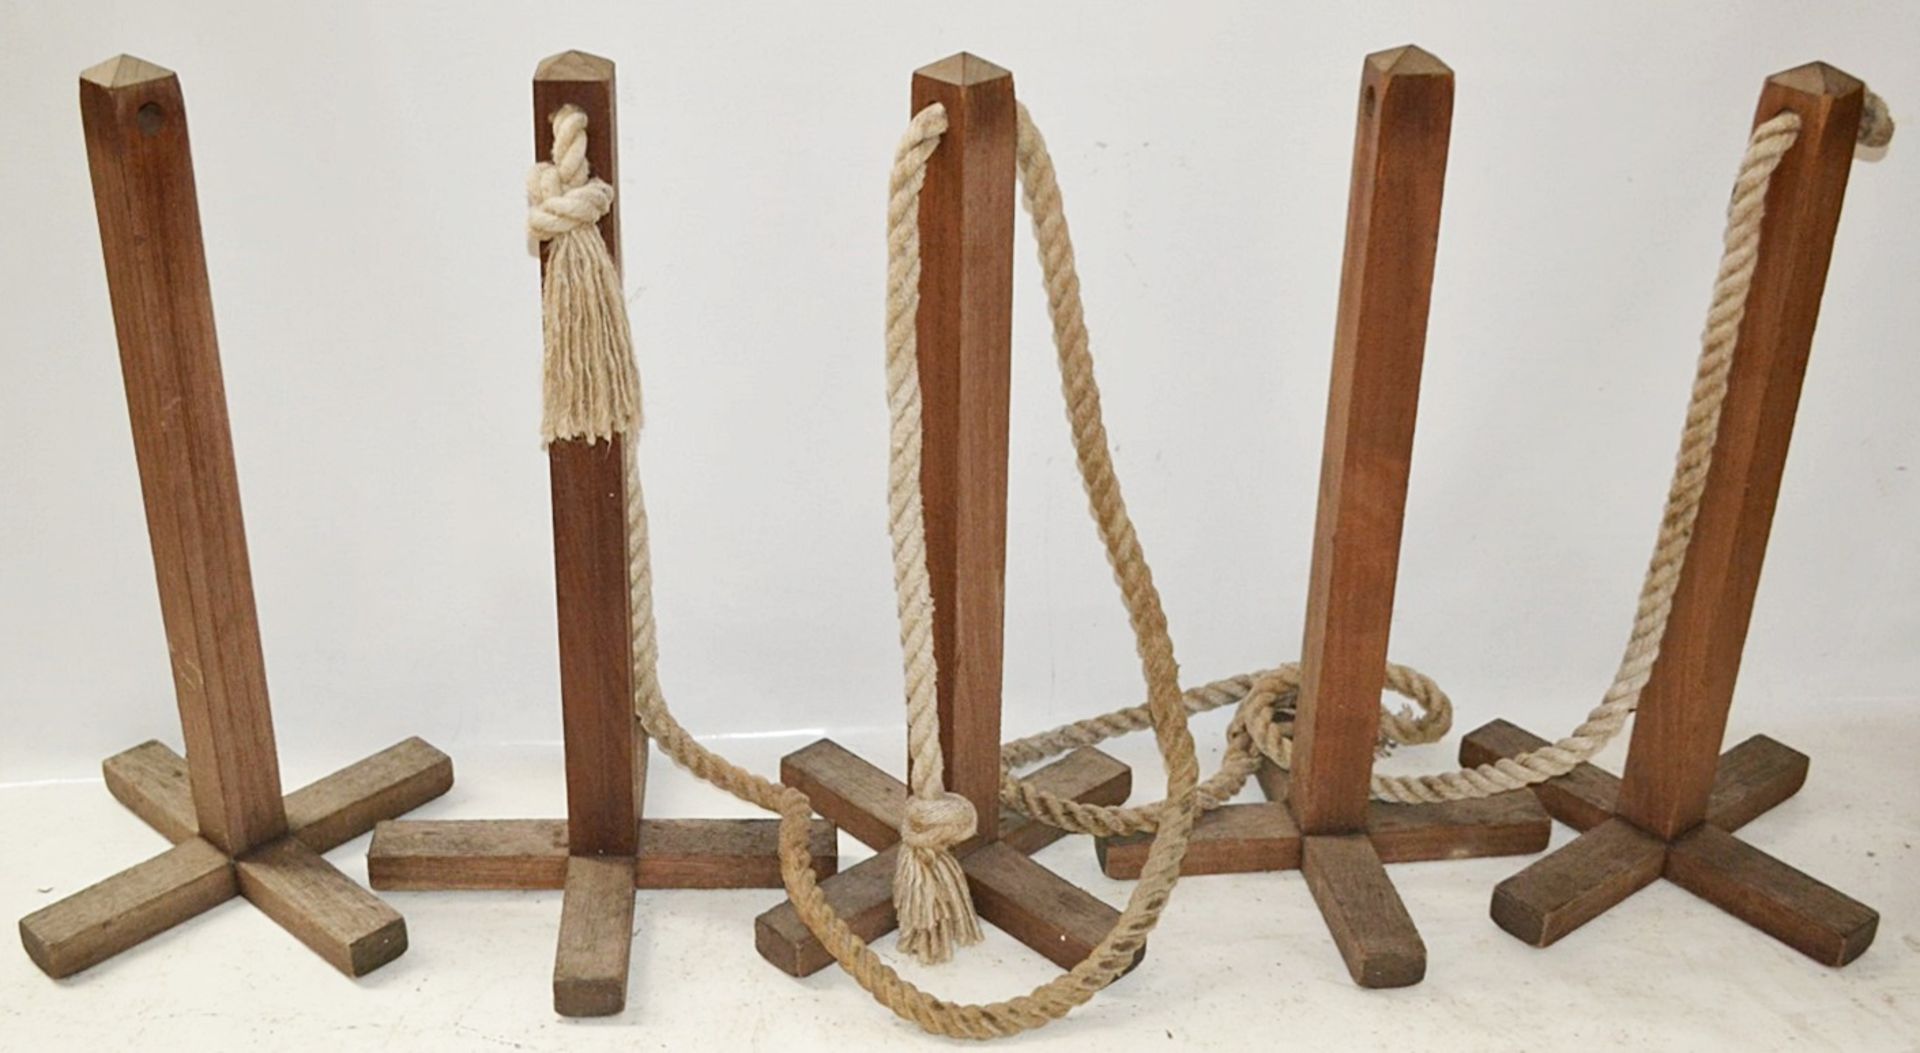 5 x Rustic Wooden Rope Barrier Posts With Rope - Dimensions: H94 x W50 x D50cm - Recently Removed - Image 2 of 5